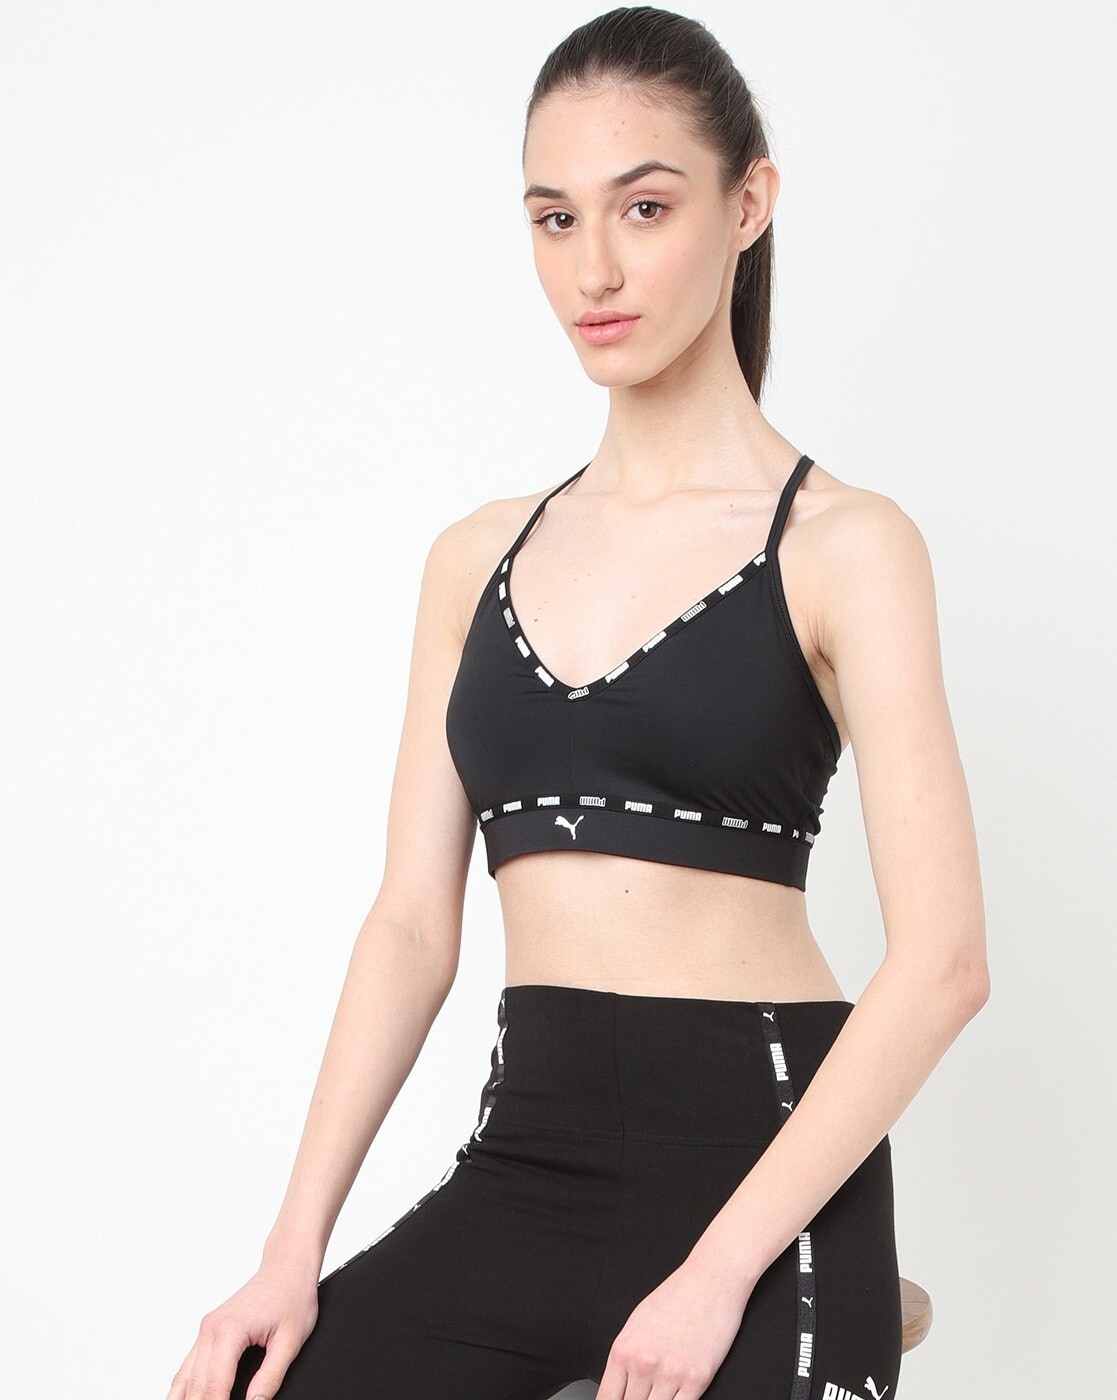 Buy Puma Low Impact Strong Strappy Bra online